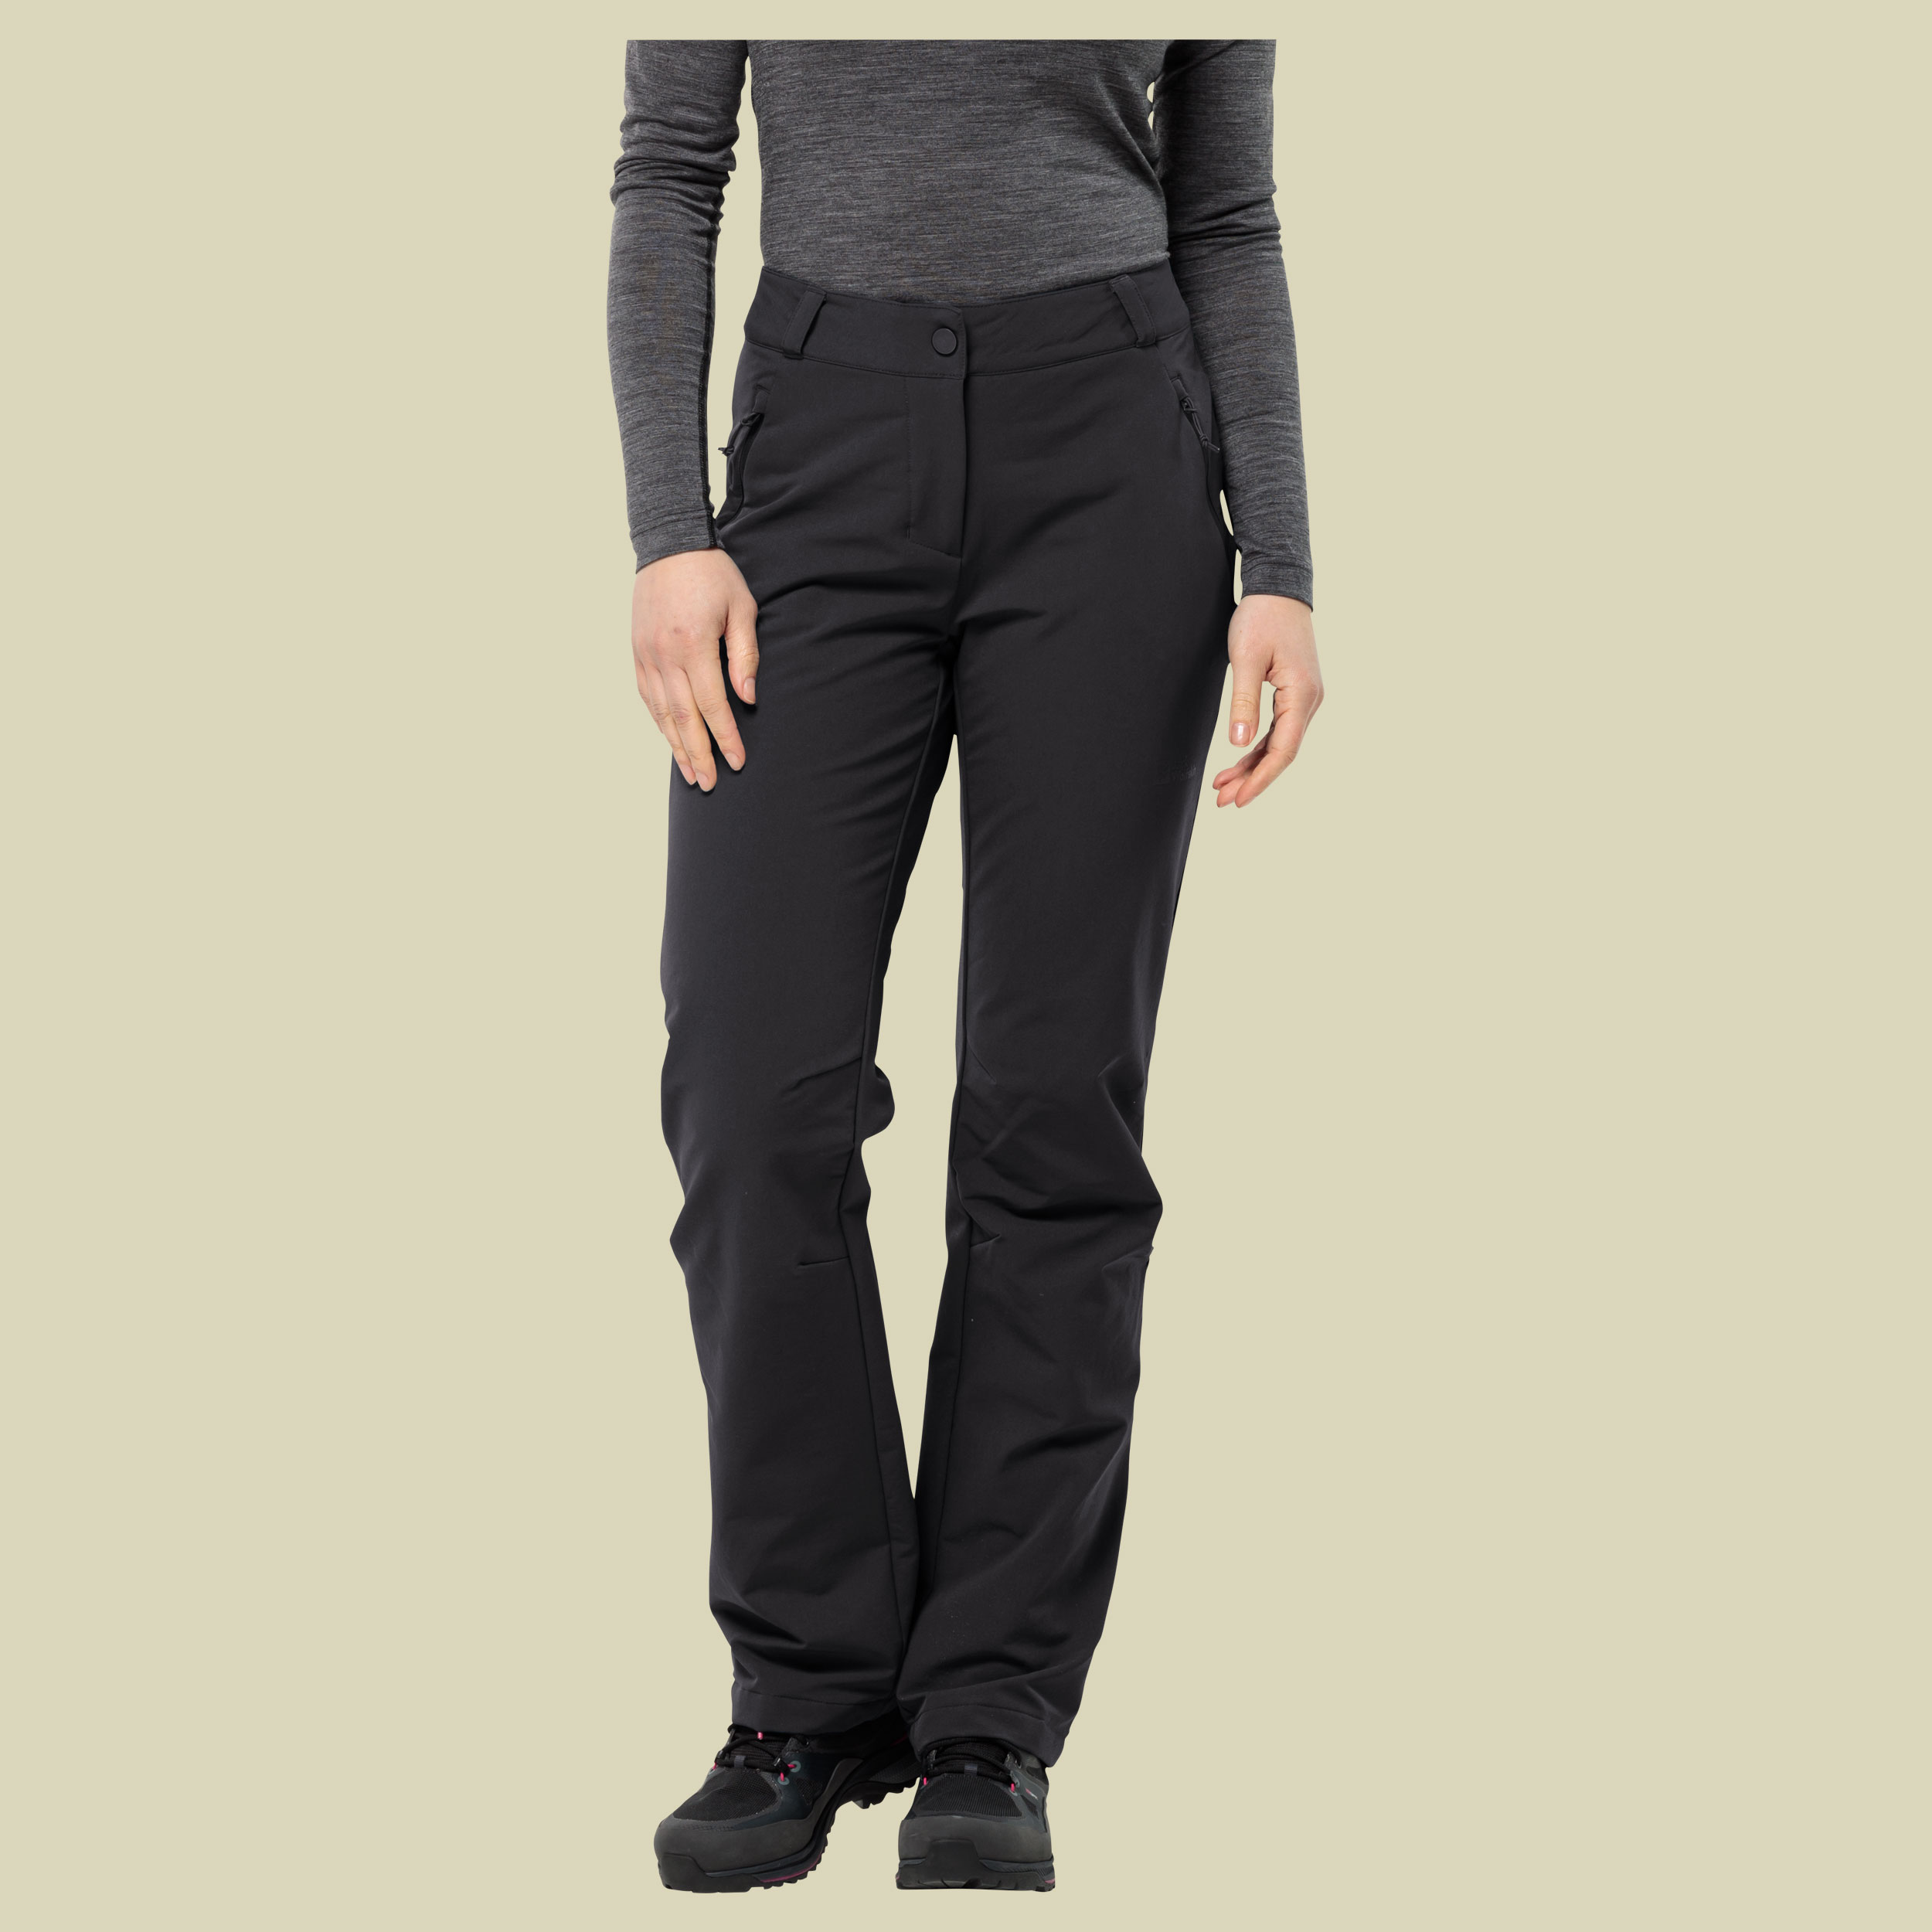 Activate Thermic Pants Women Größe 40 Farbe black